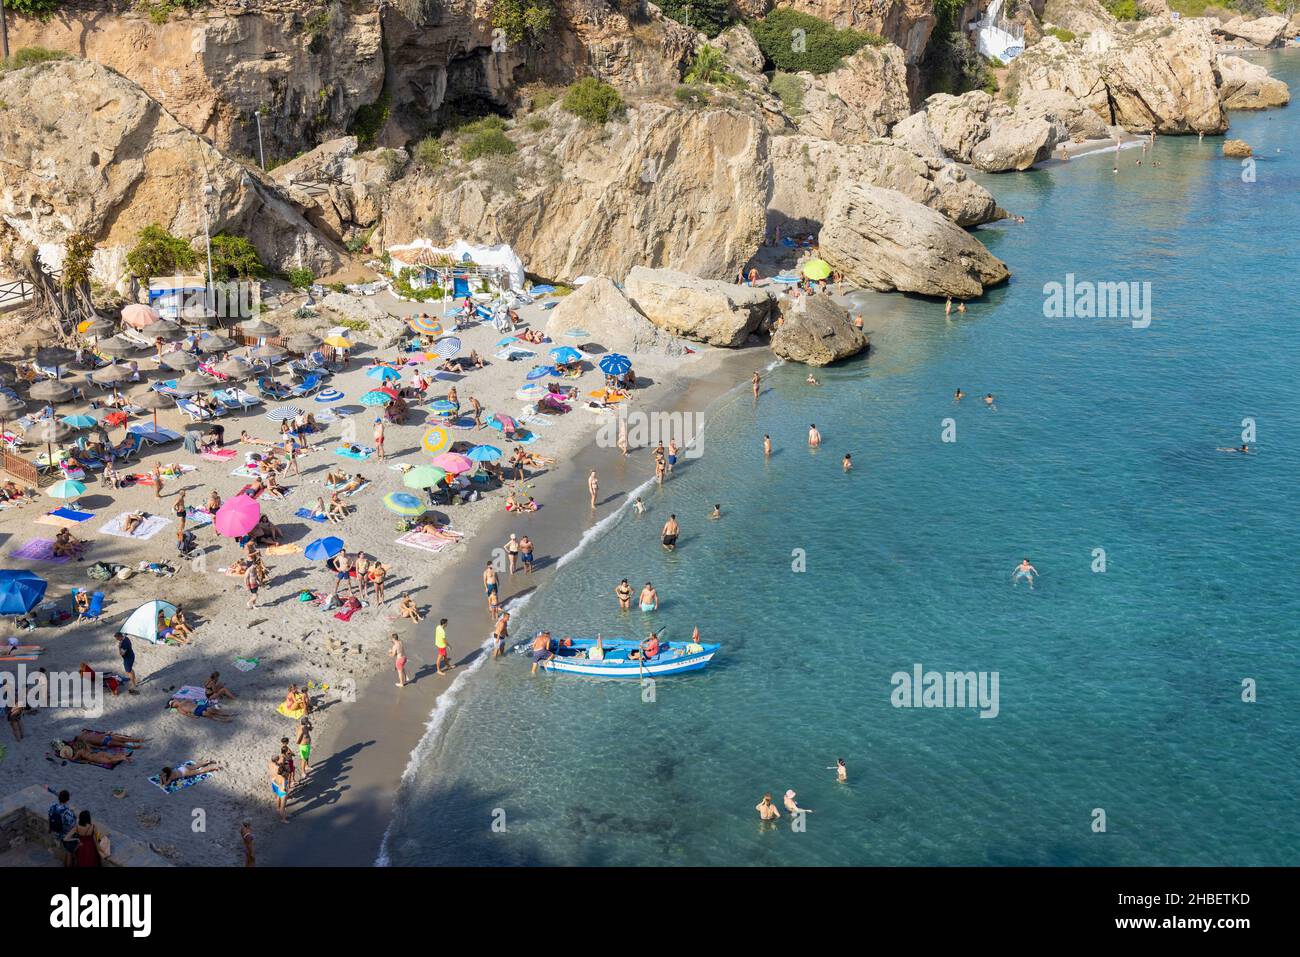 Fishermen in typical fishing boat leaving Calahonda beach crowded with beachgoers.  Nerja, Costa del Sol, Malaga Province, Andalusia, southern Spain. Stock Photo